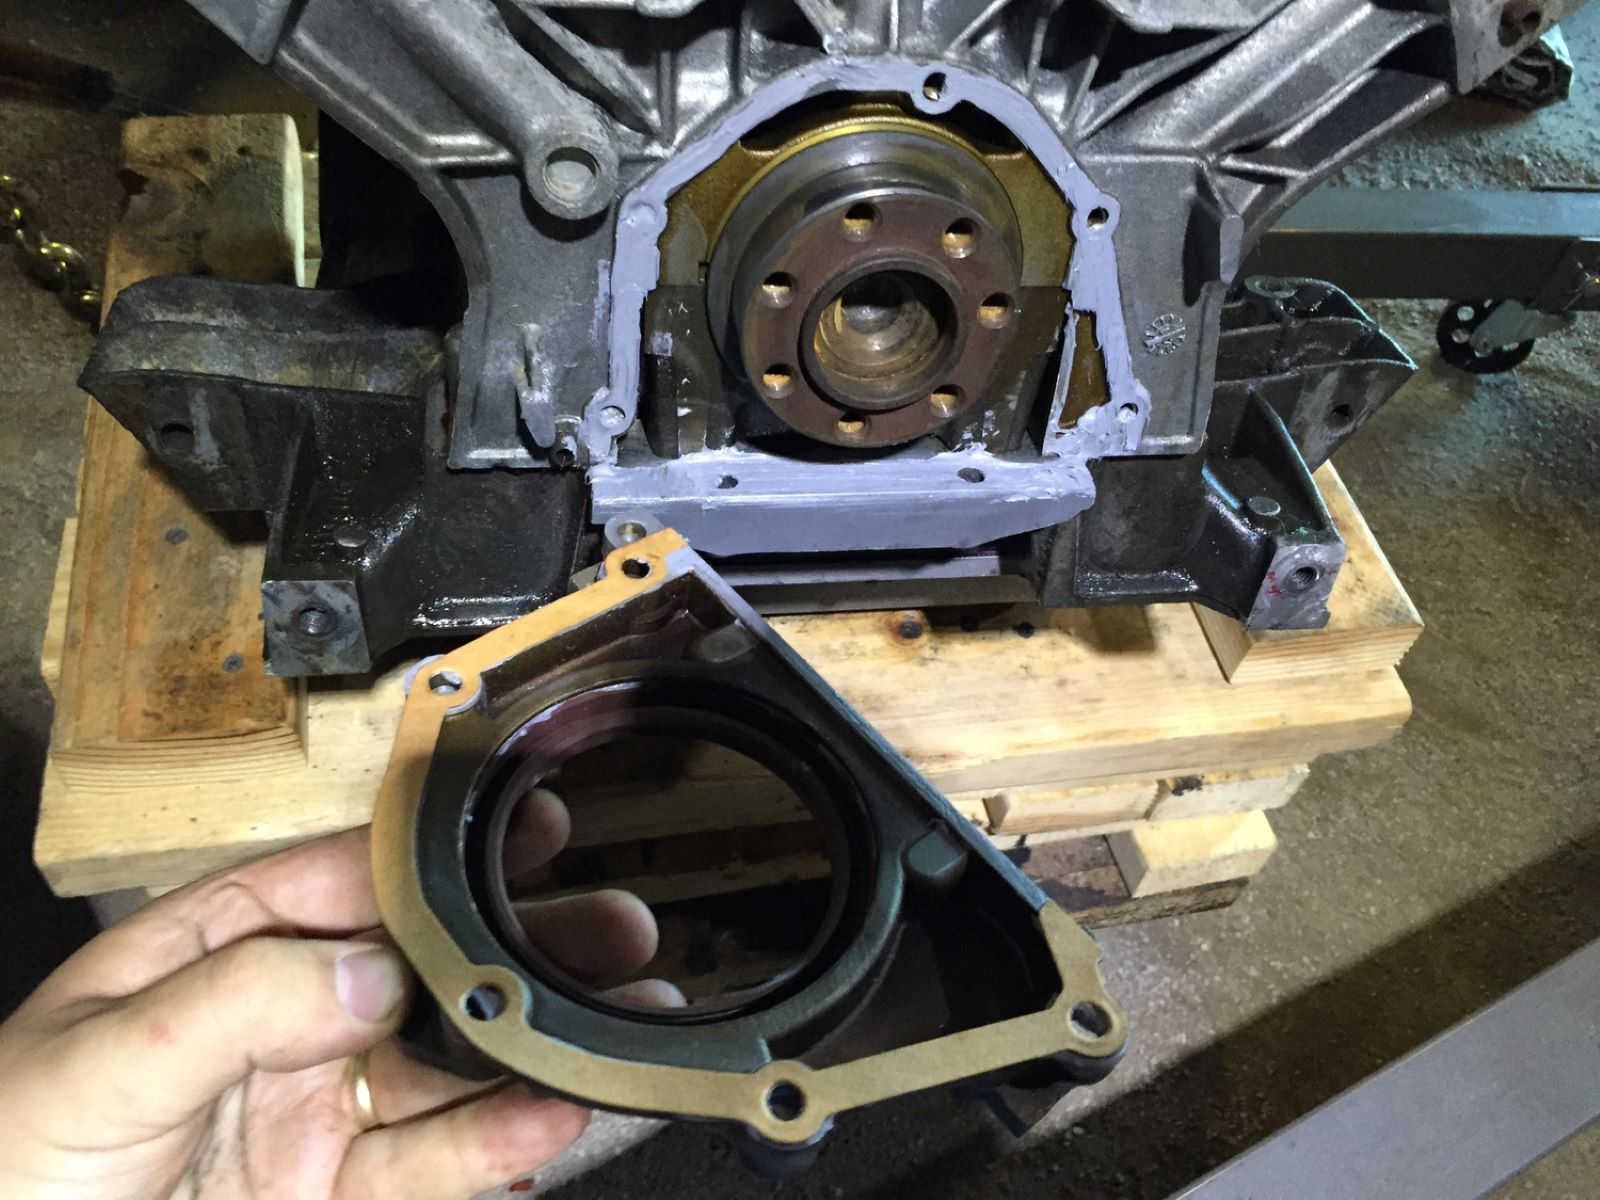 The Shocking Cost Of Fixing A Rear Main Seal Leak Revealed!